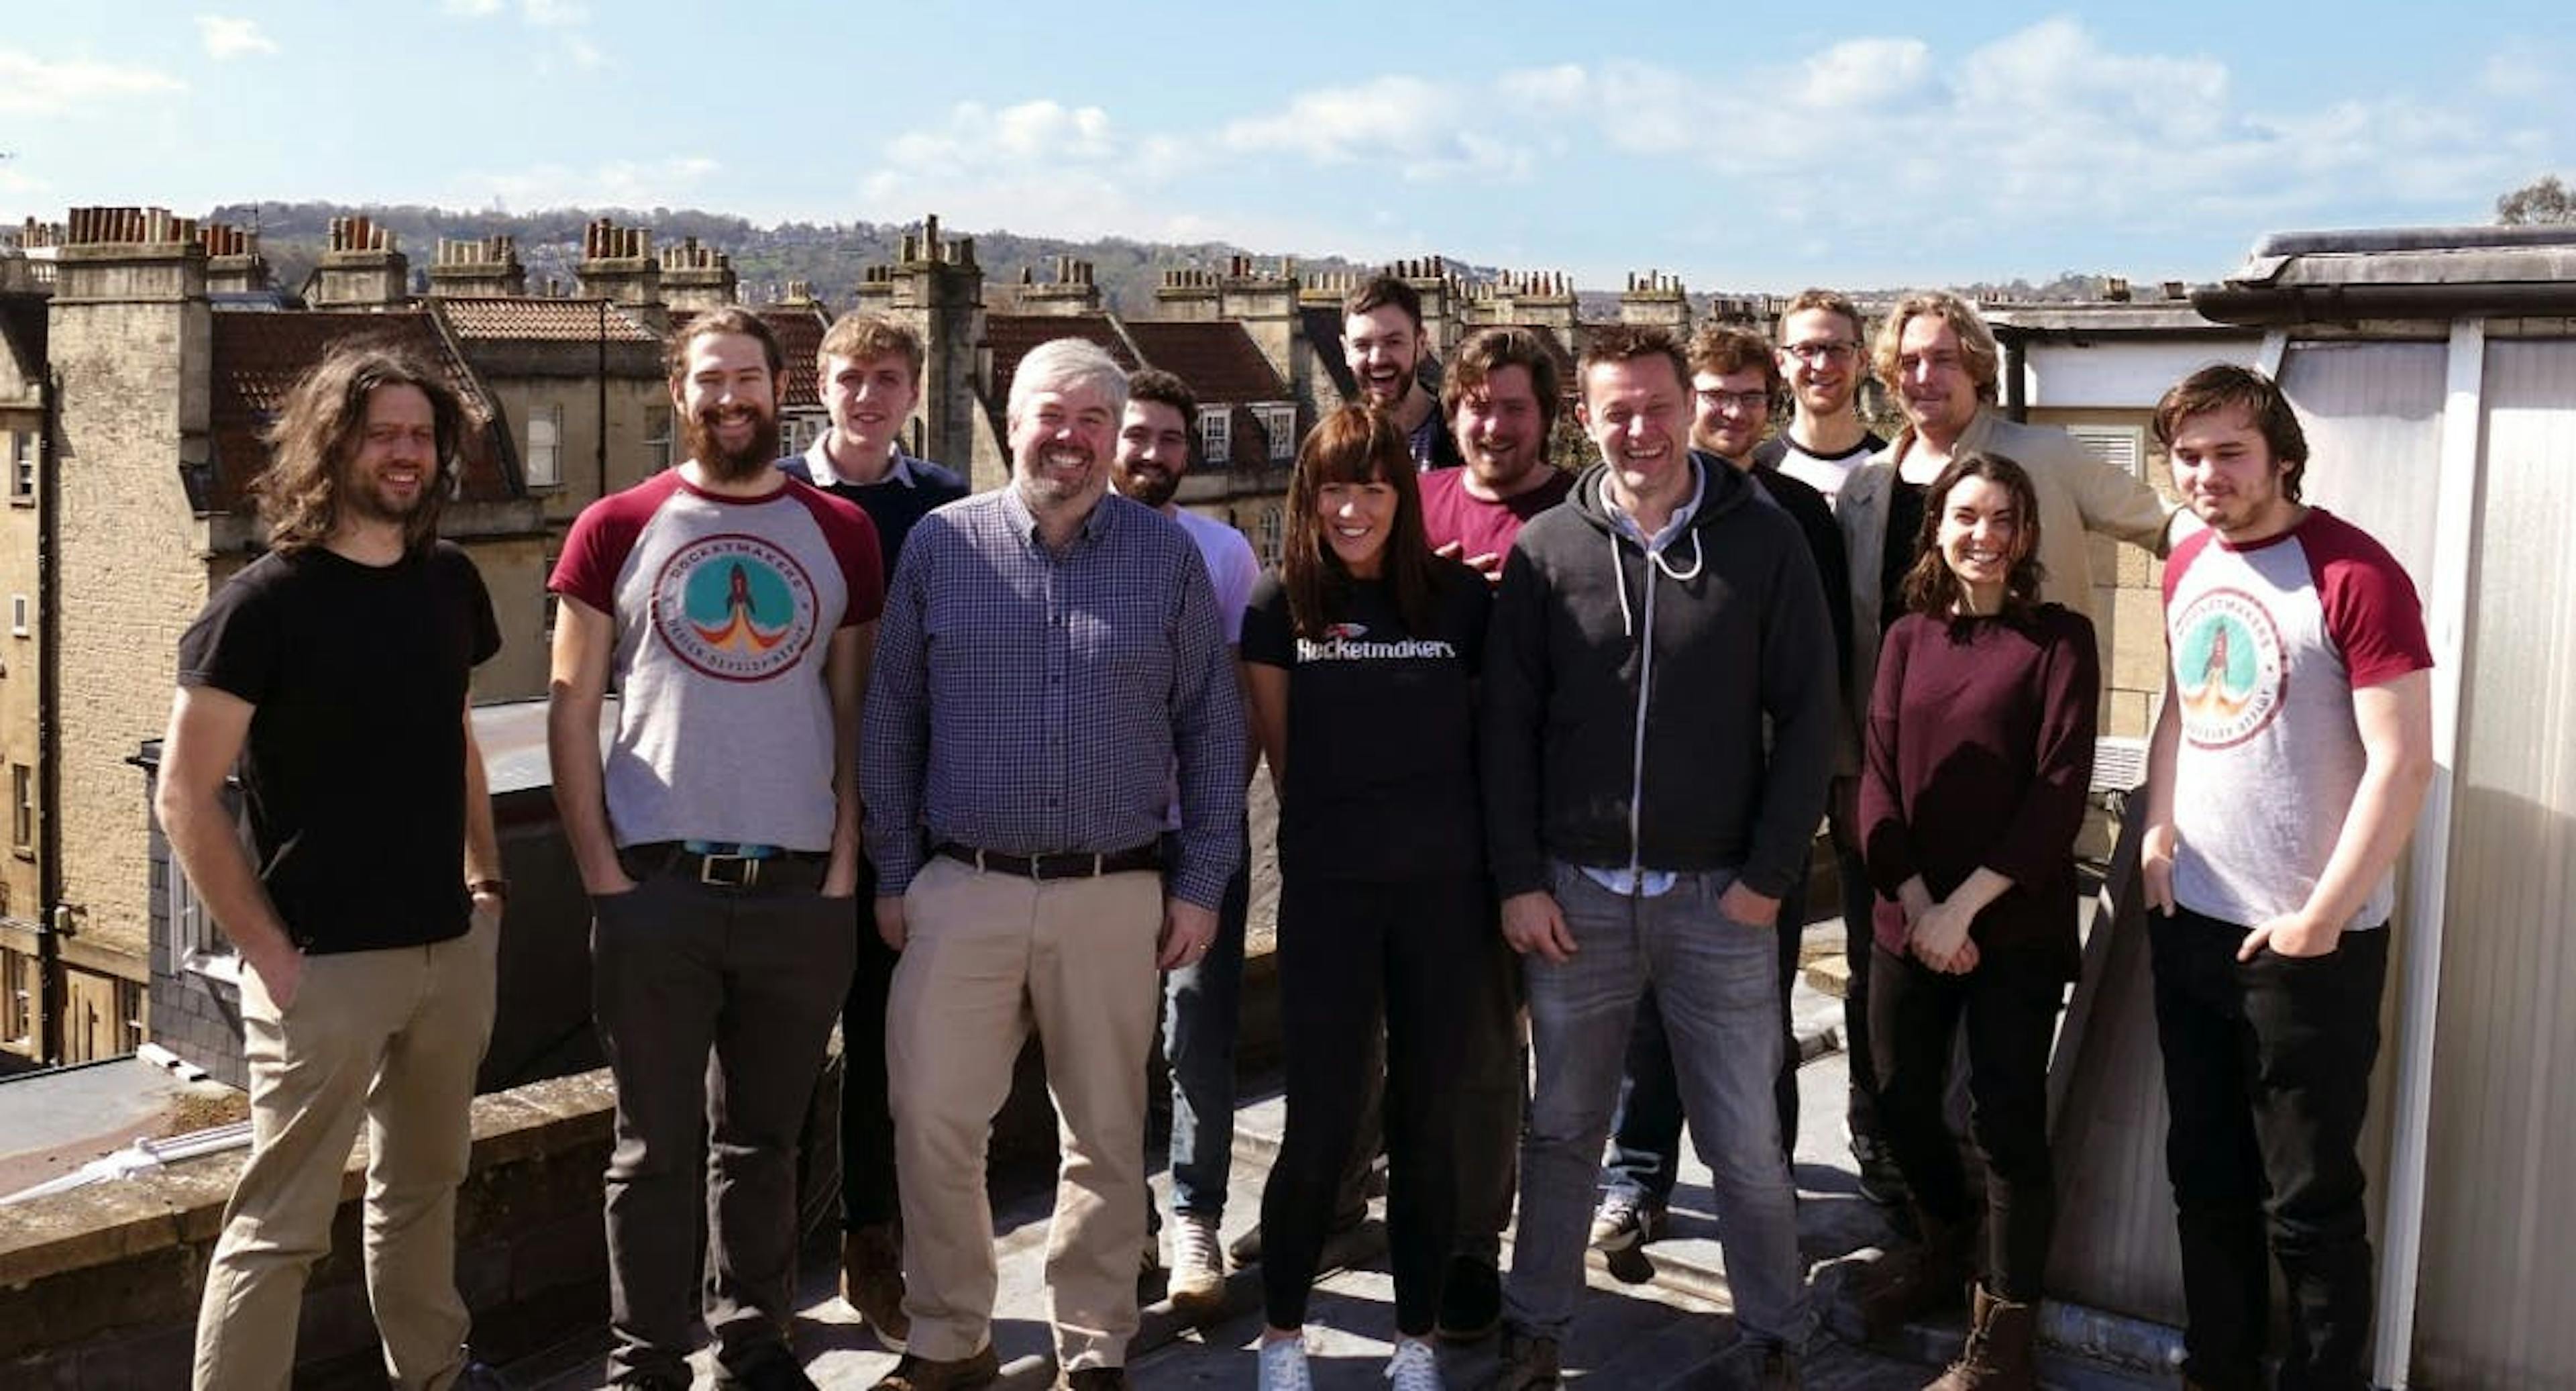 Picture featuring 14 members of the Rocketmakers team in 2018